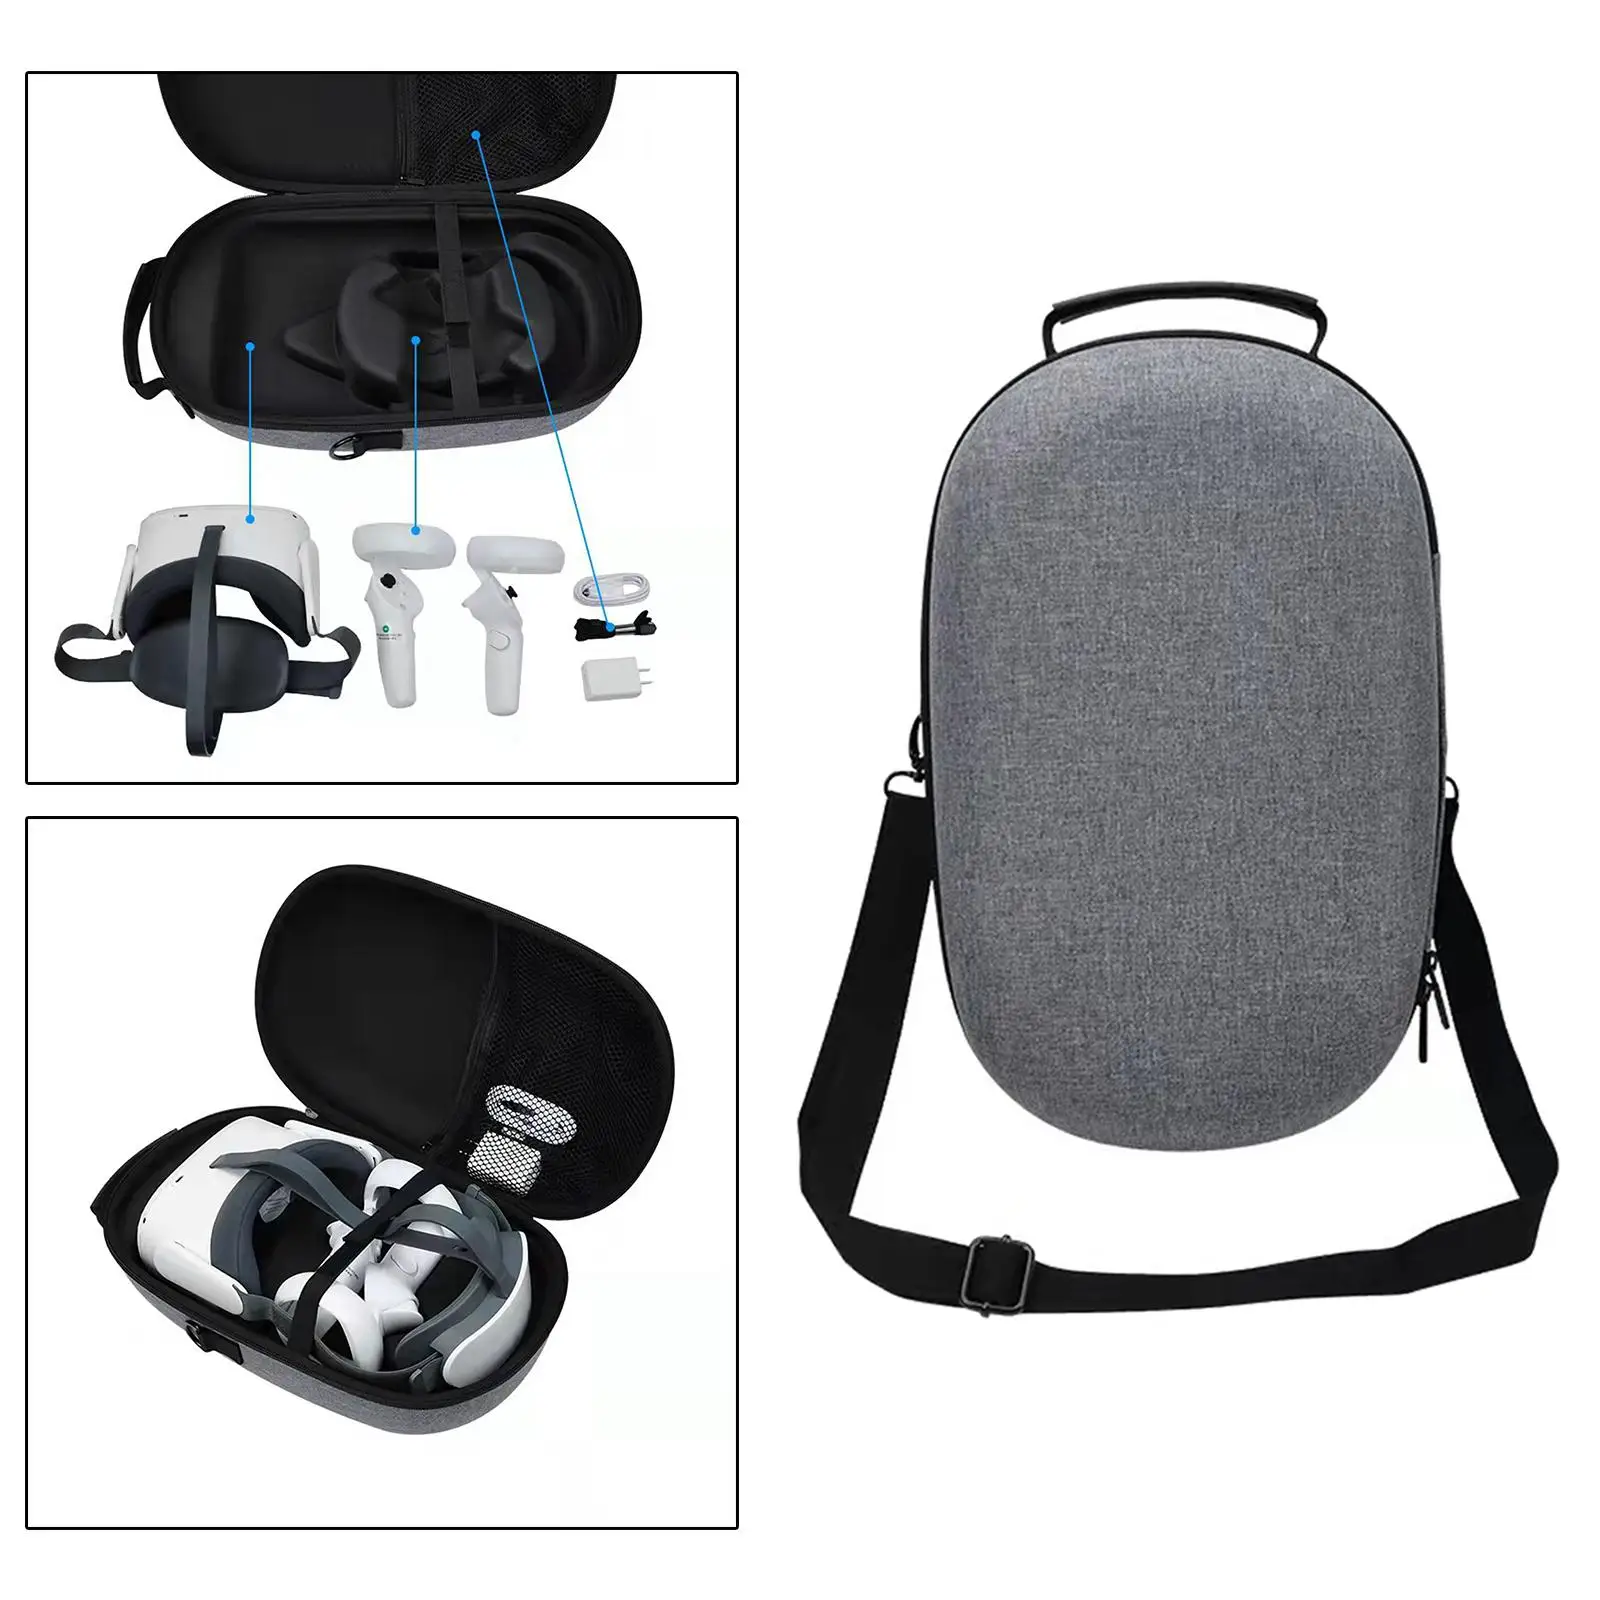 Travel Case Detachable Shoulder Strap for Pico Neo 3 Large Capacity Waterproof Accessories